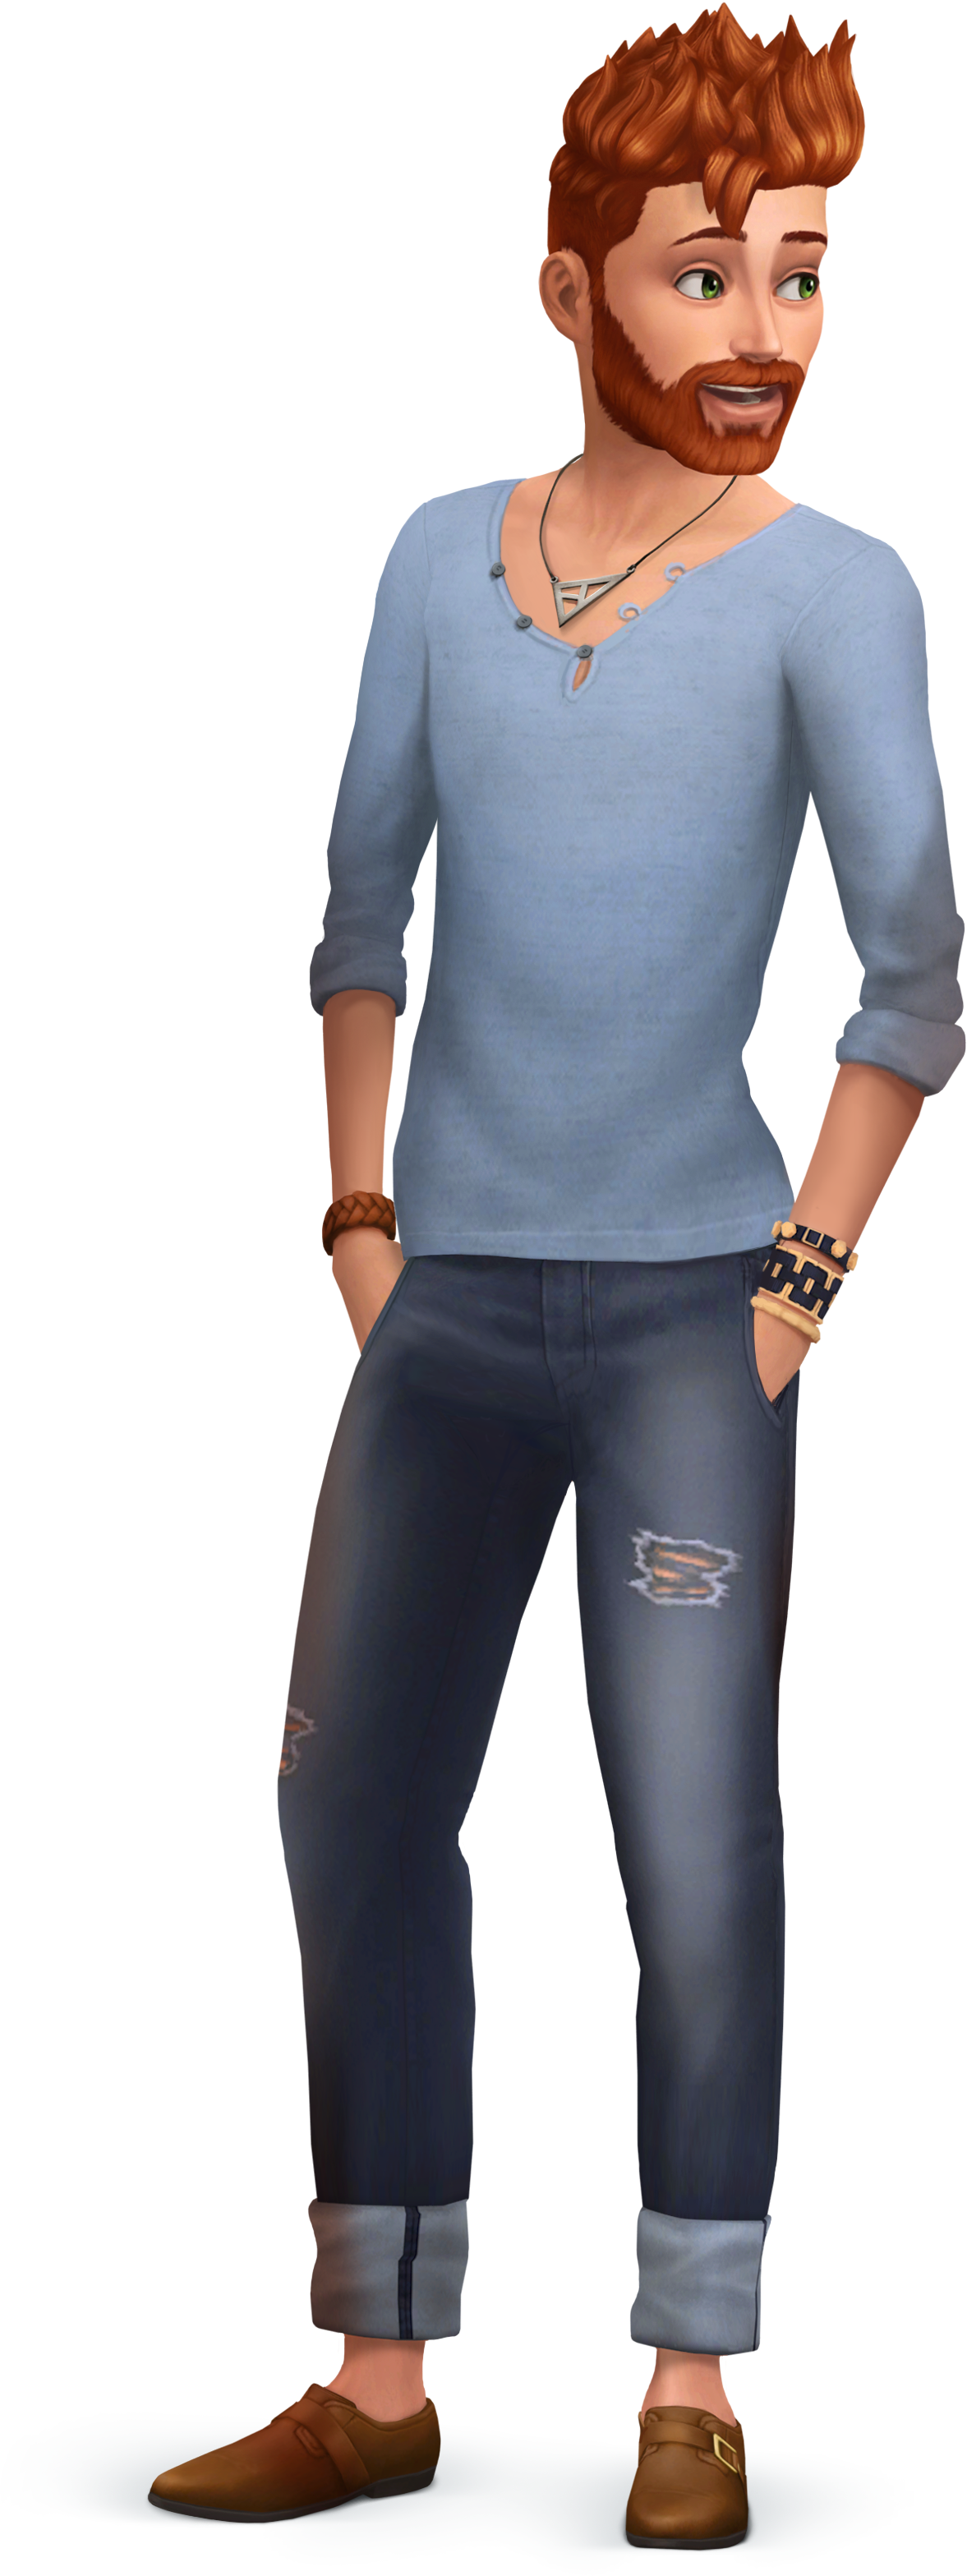 The Sims Characters Transparent Background